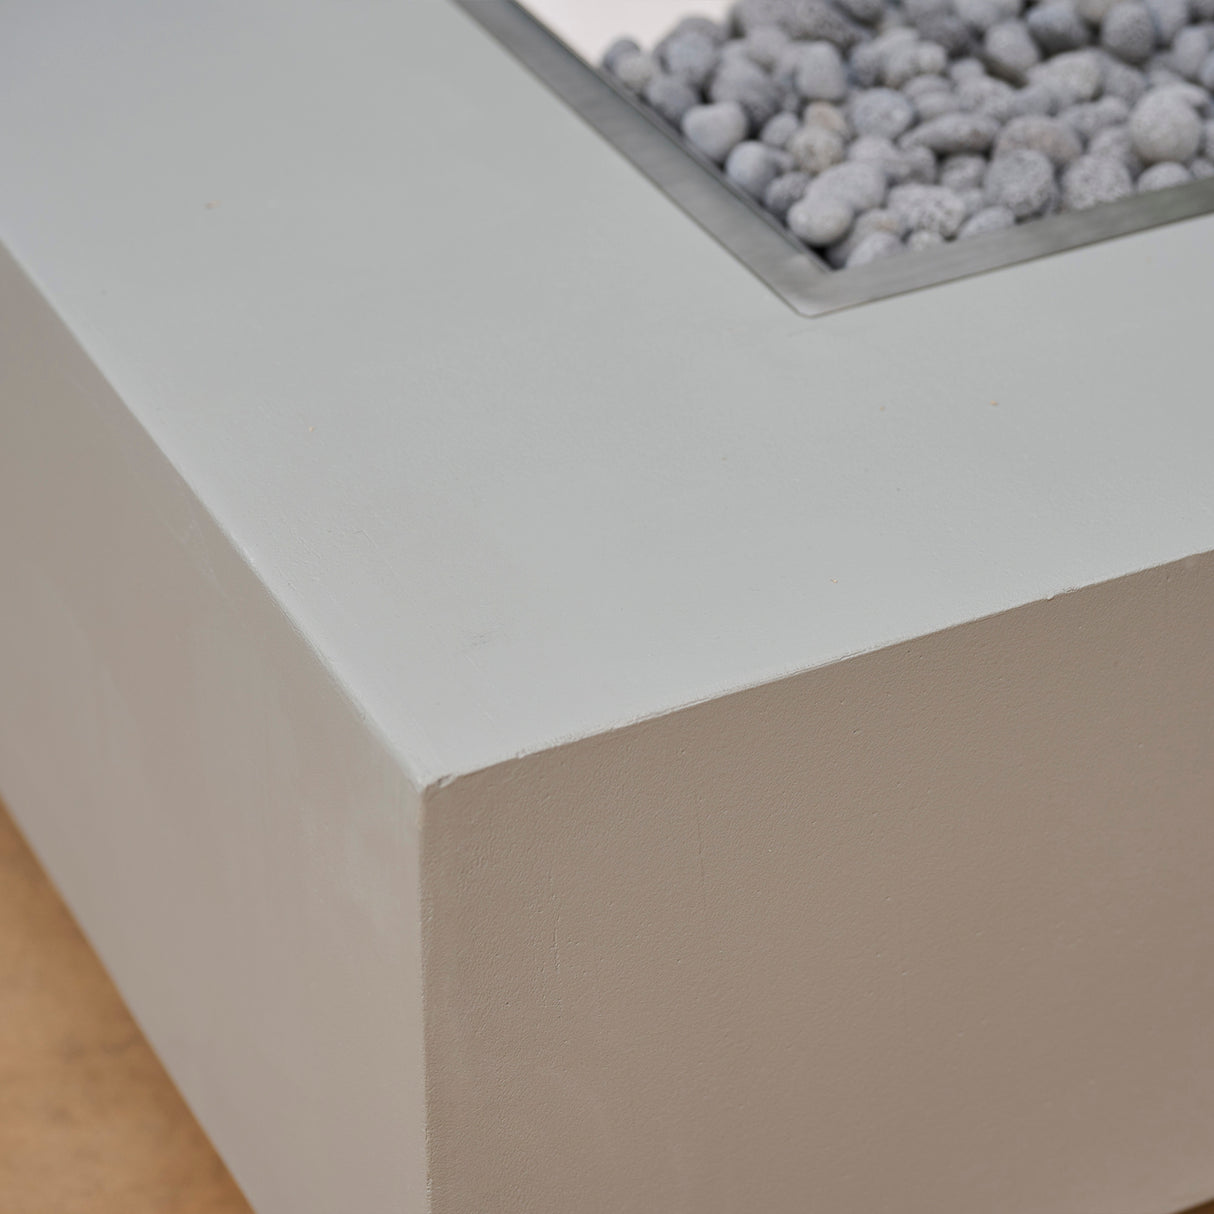 A close up view of the material used on the Harbor View Rectangular Gas Fire Pit Table